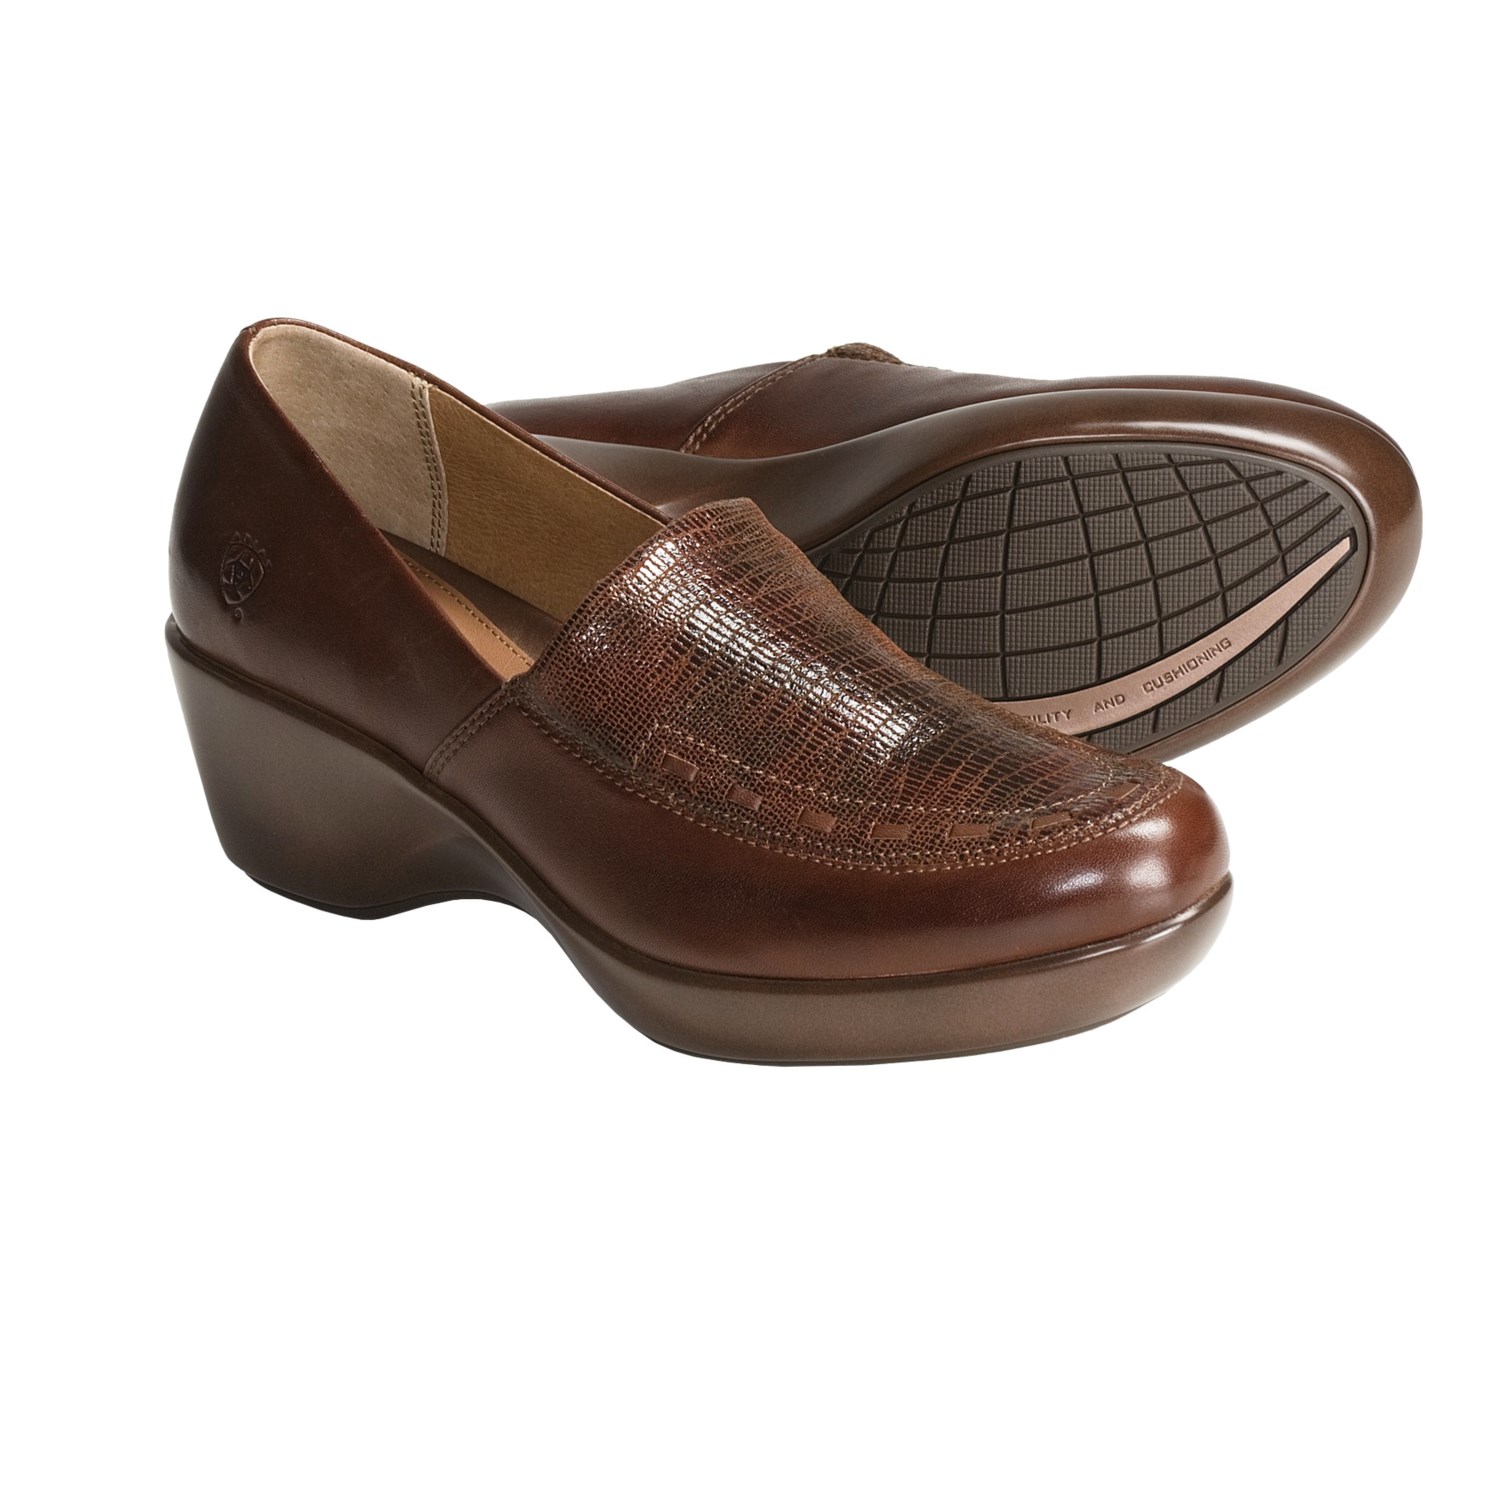 Ariat Arch Leather Shoes - Slip-Ons (For Women) in Cinnamon